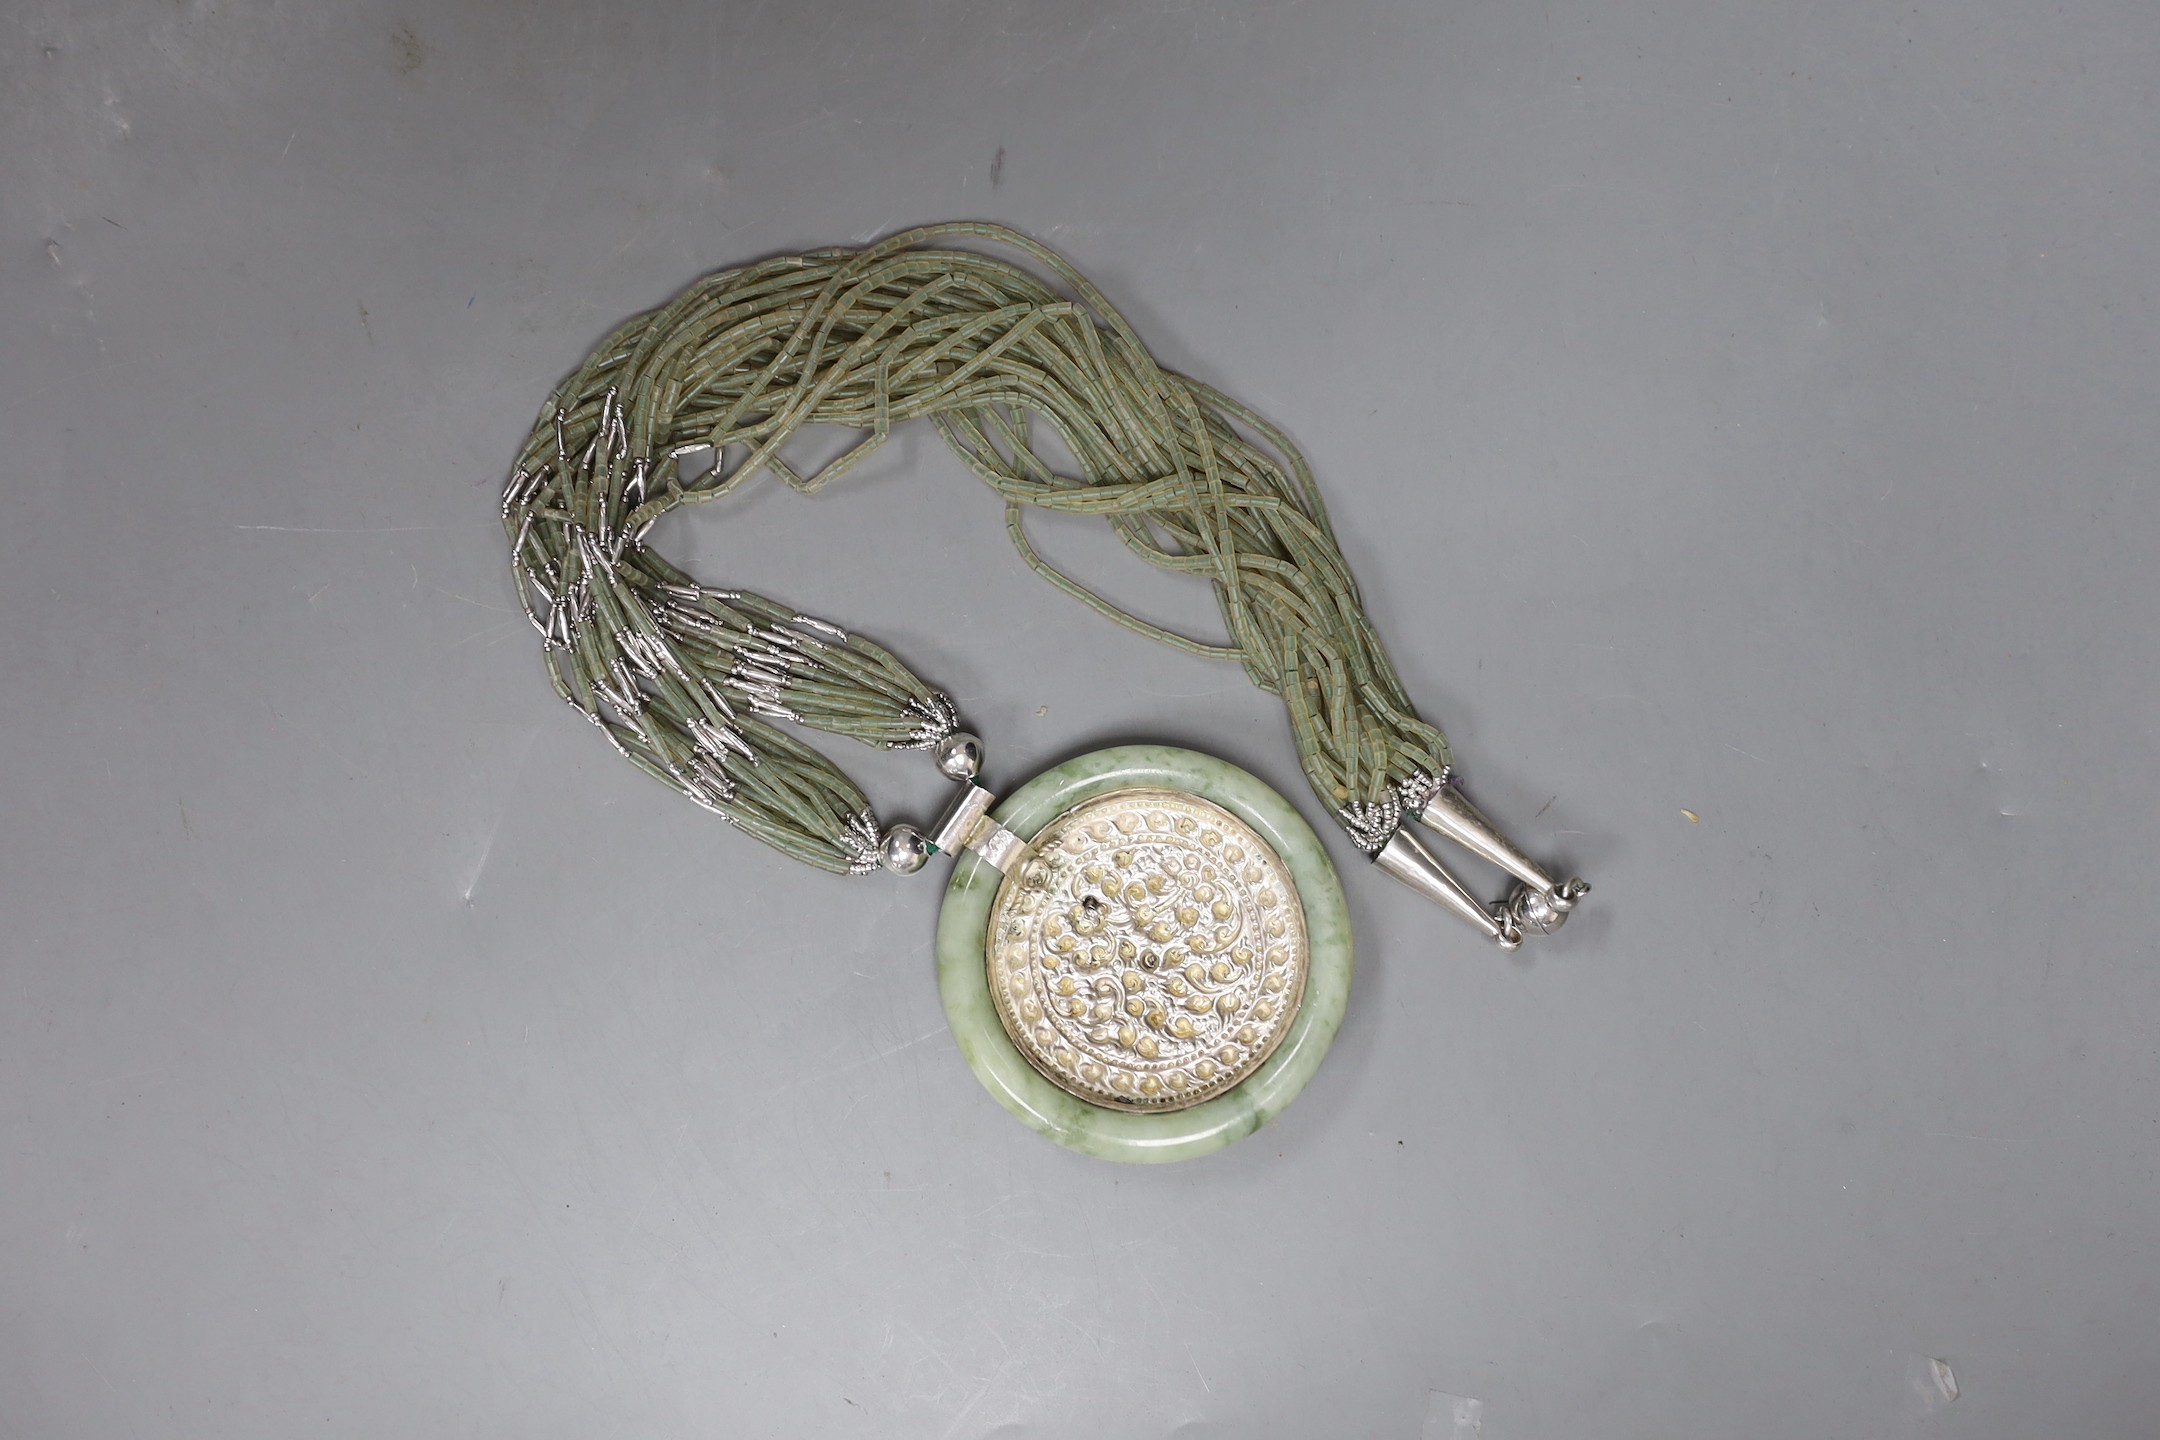 A Kai-Yin-Lo of Hong Kong jadeite and white metal mounted necklace, 81cm.